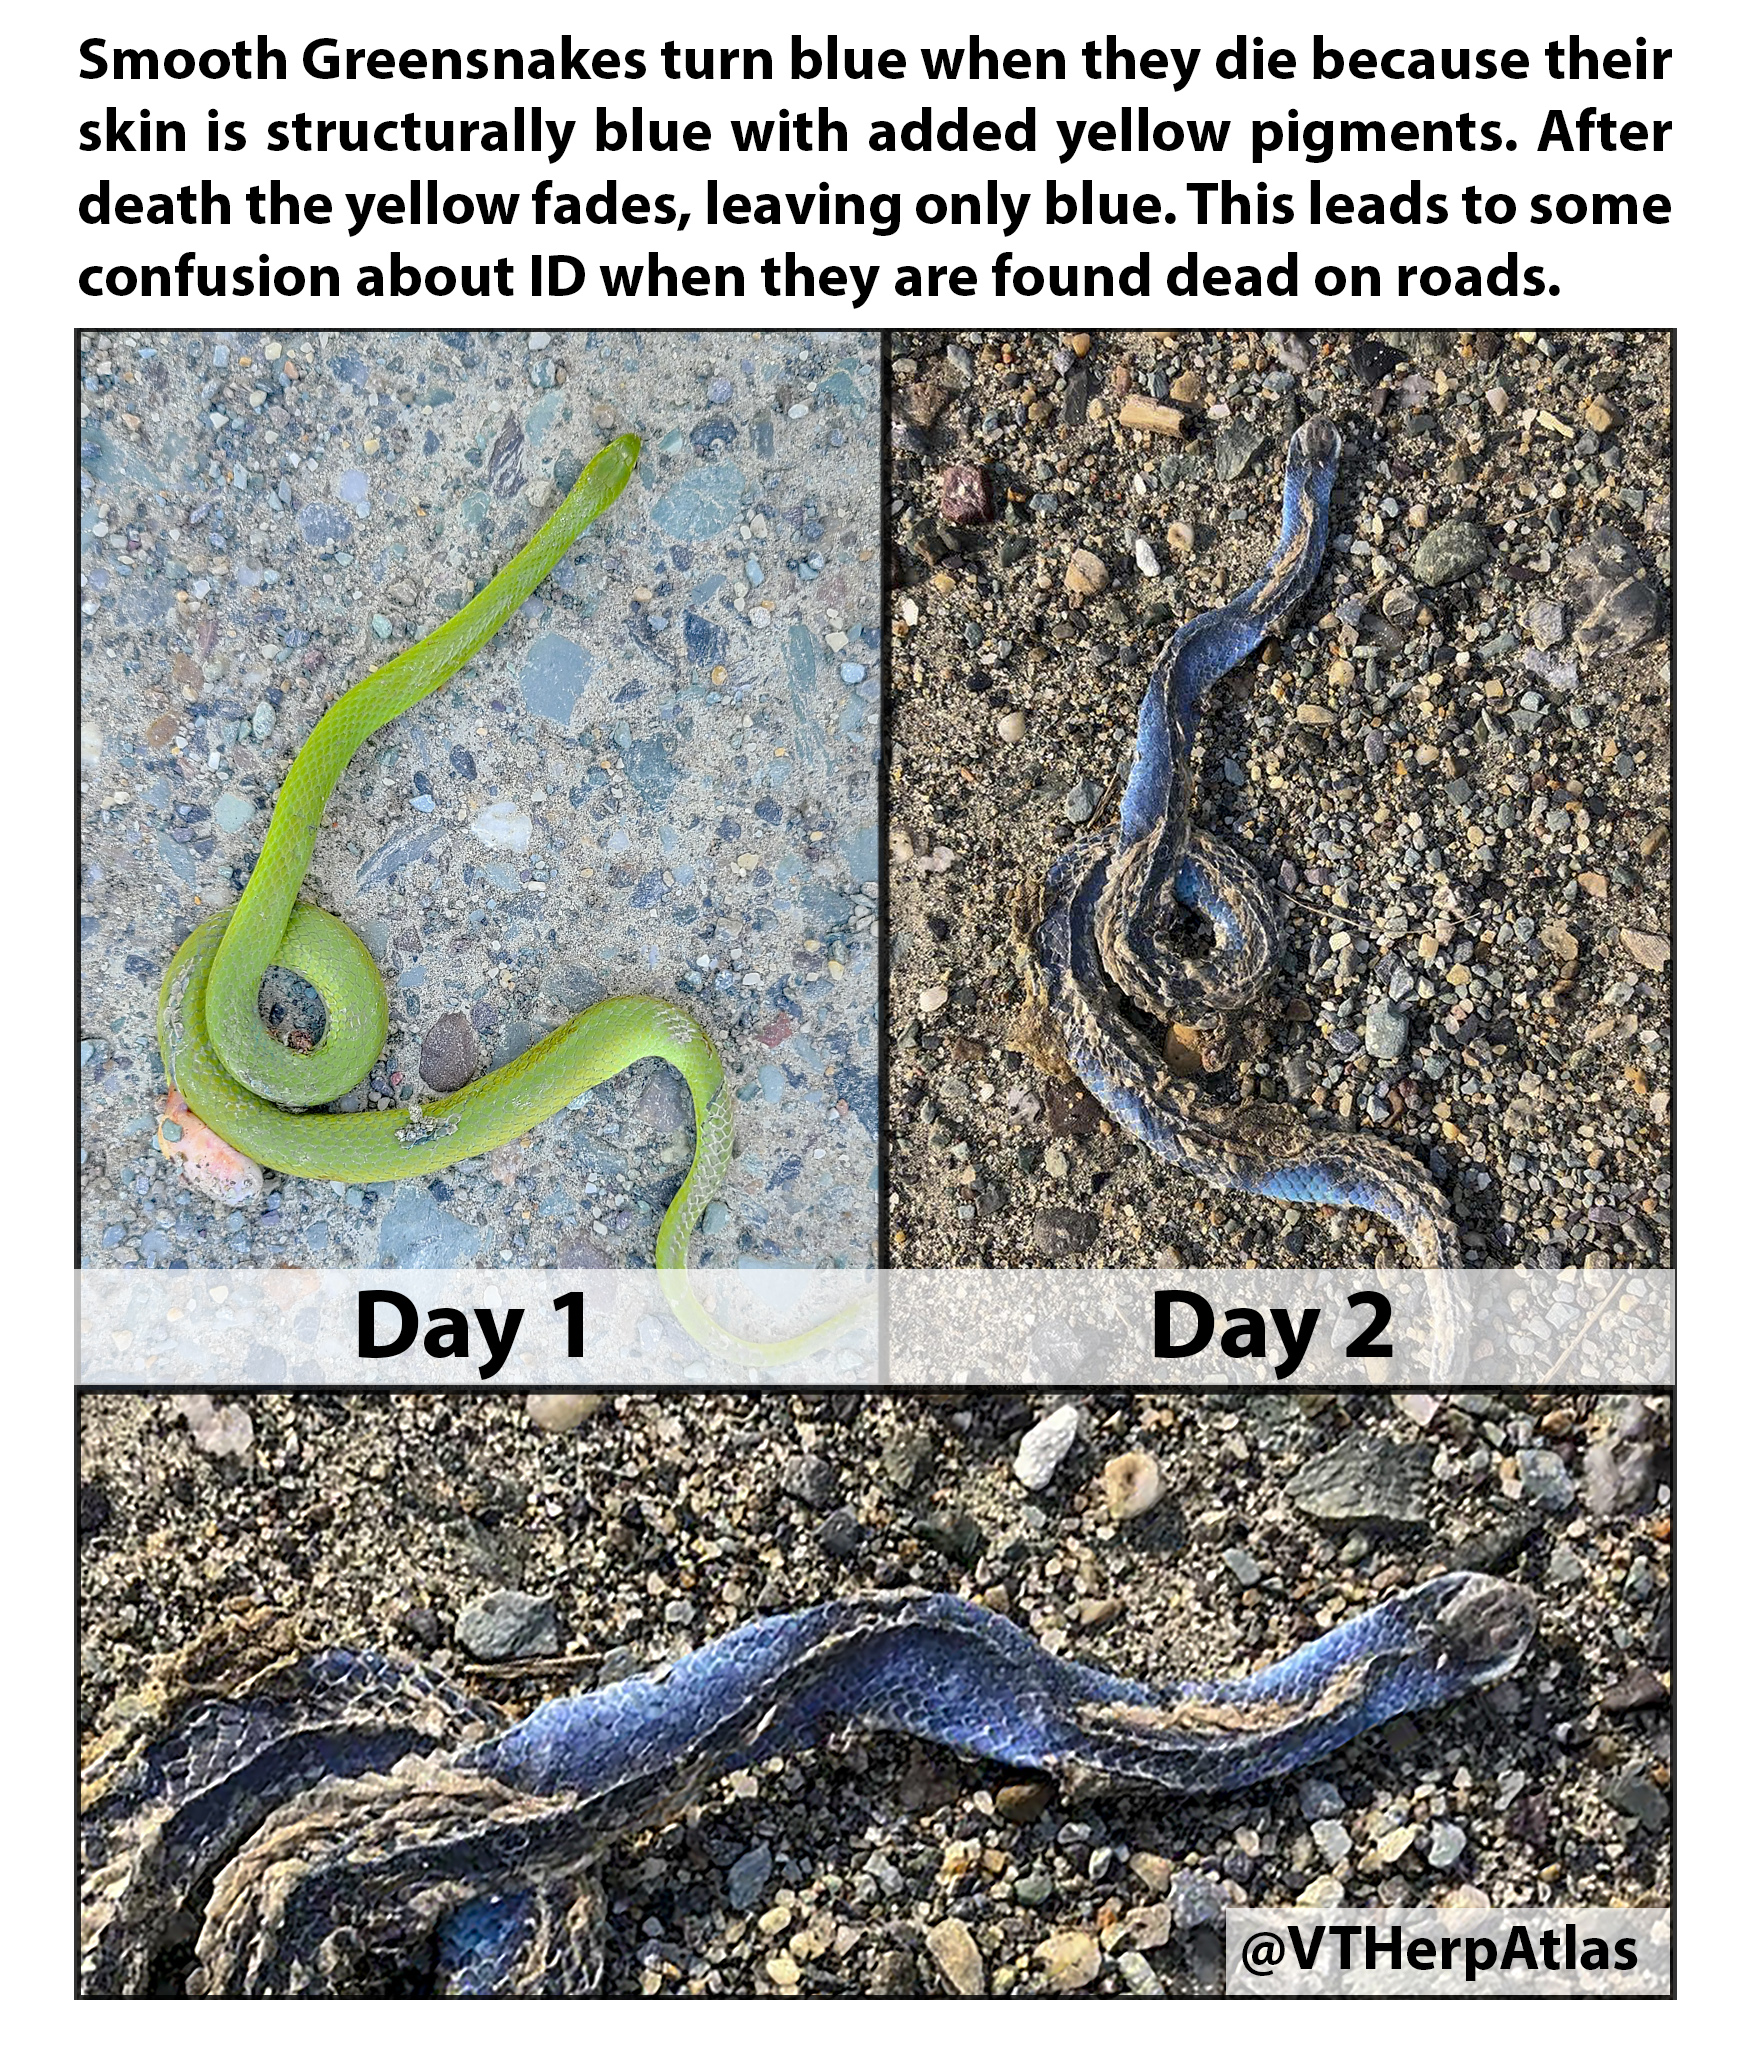 Pigmentation changes in dead Greensnakes. Info from Kiley Briggs.